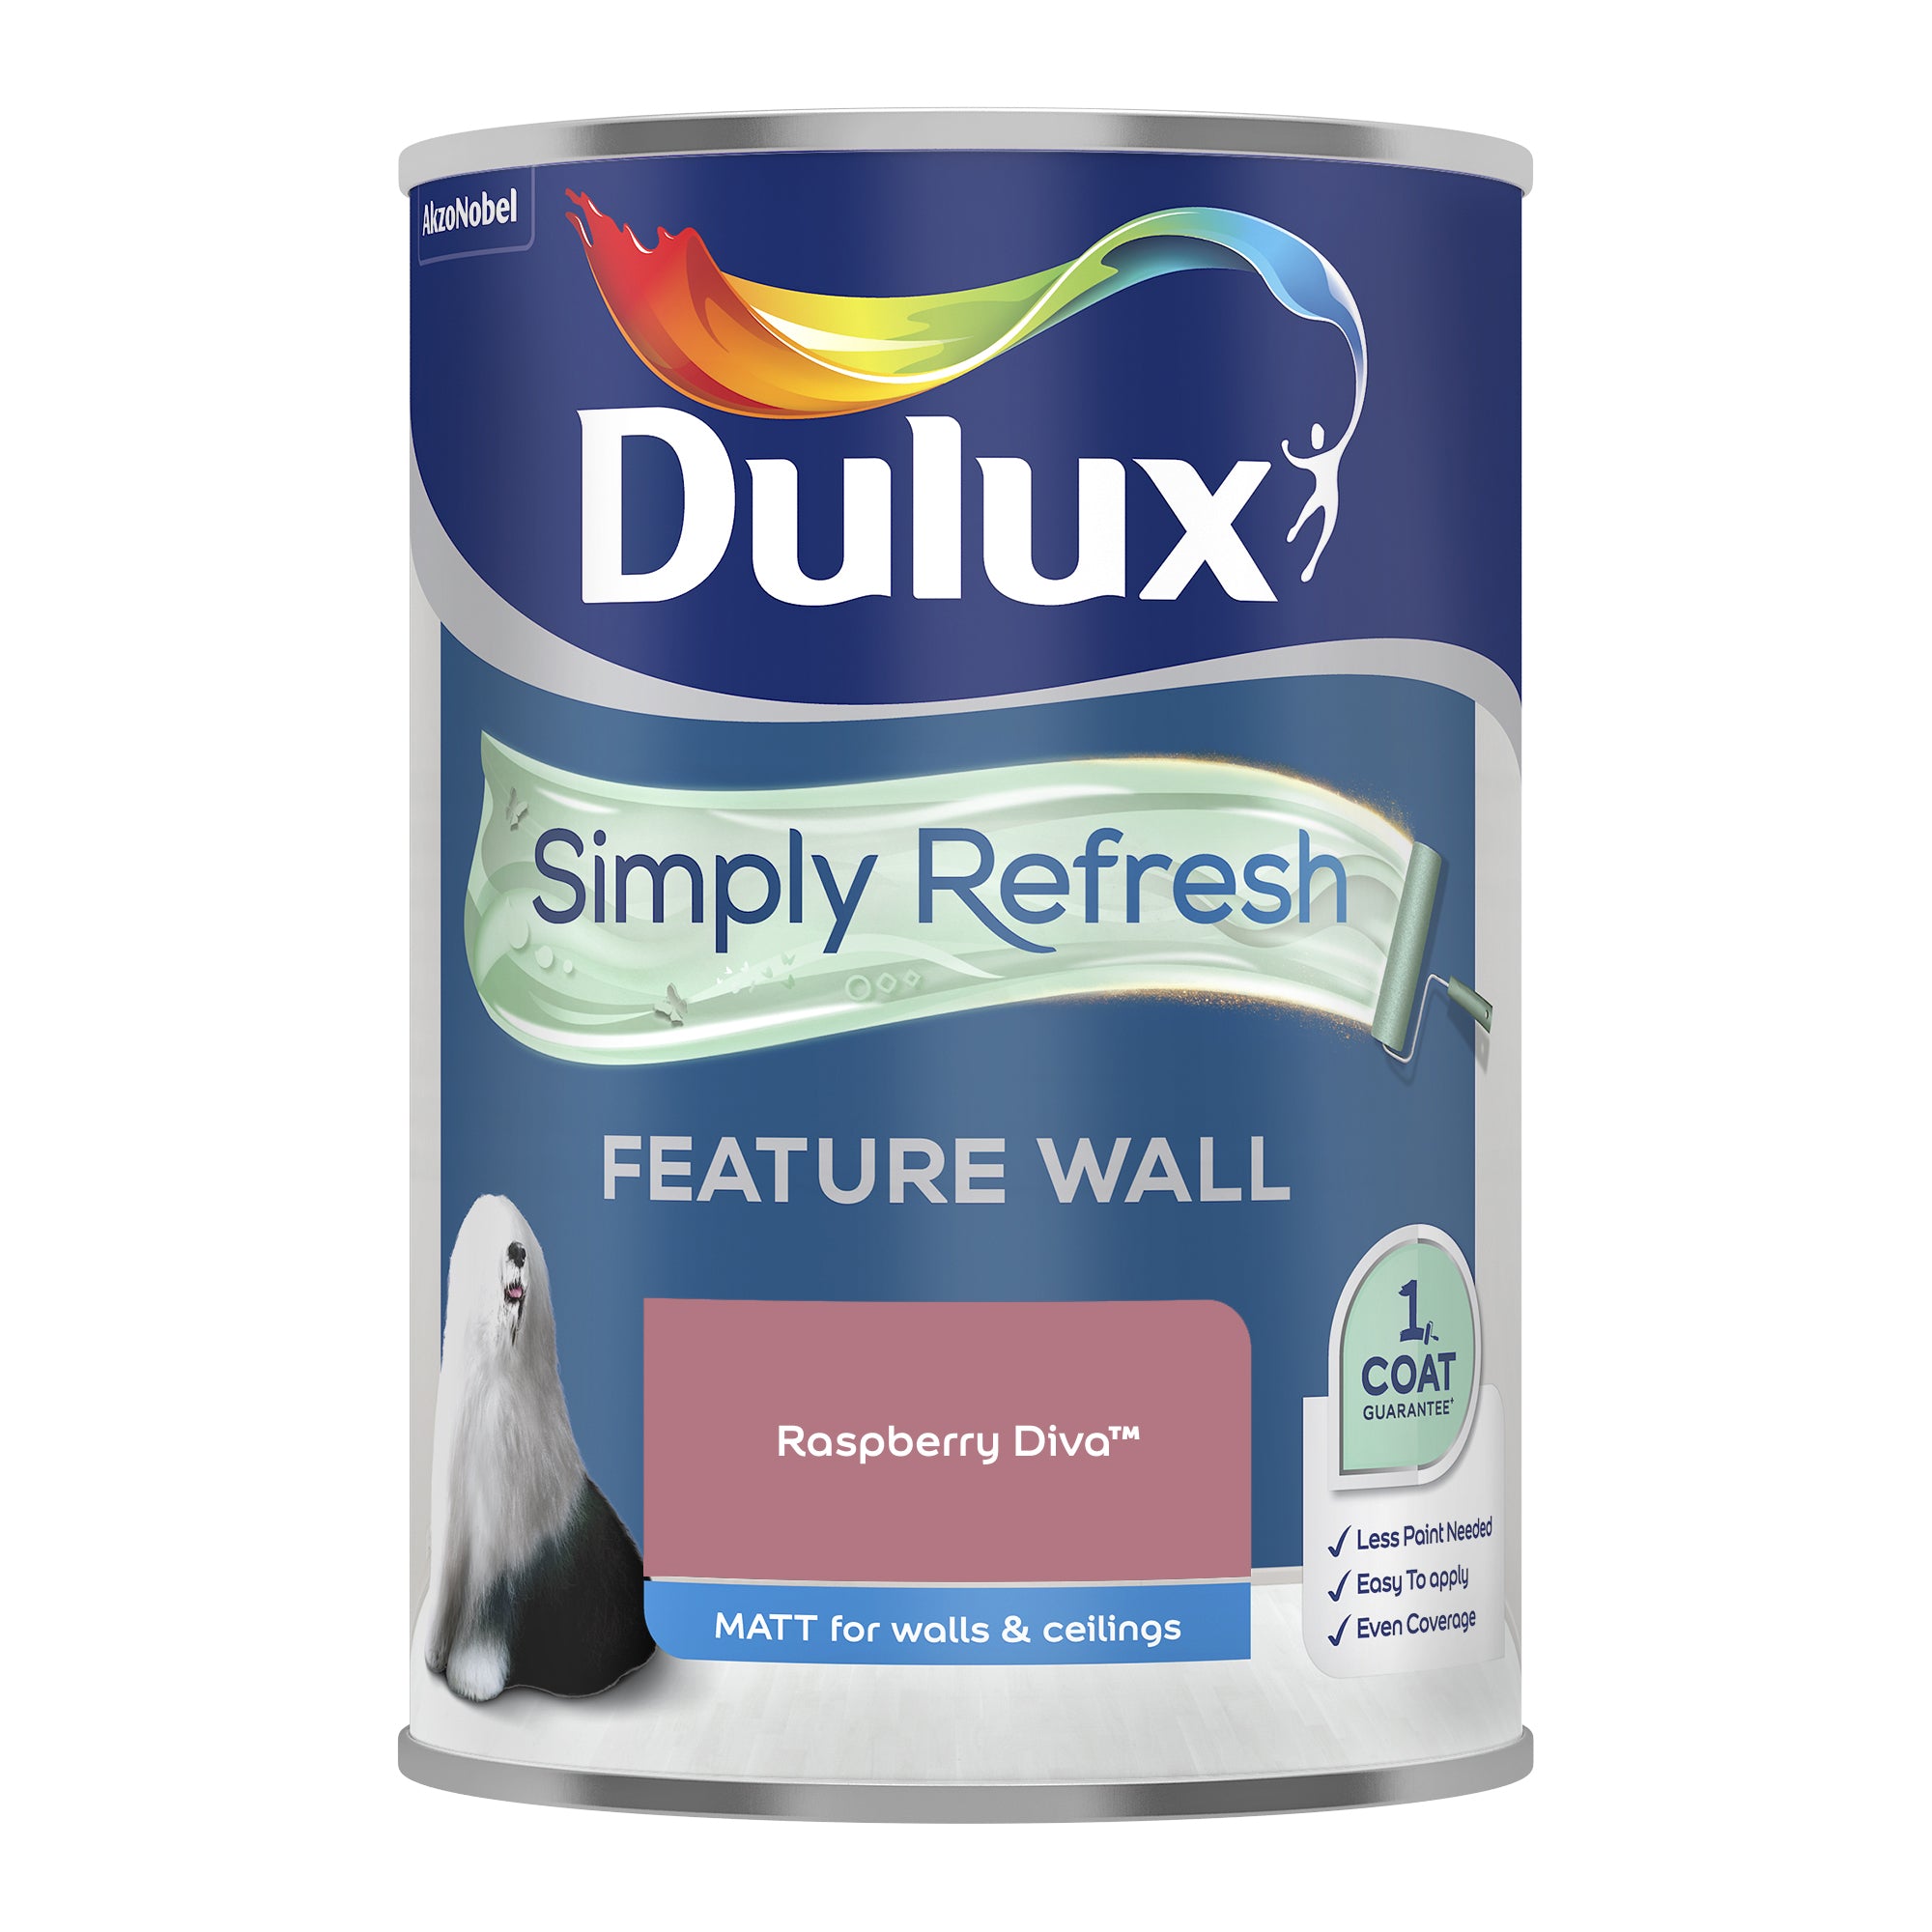 Dulux Simply Refresh One Coat Feature Wall Rasberry Diva 1.25L